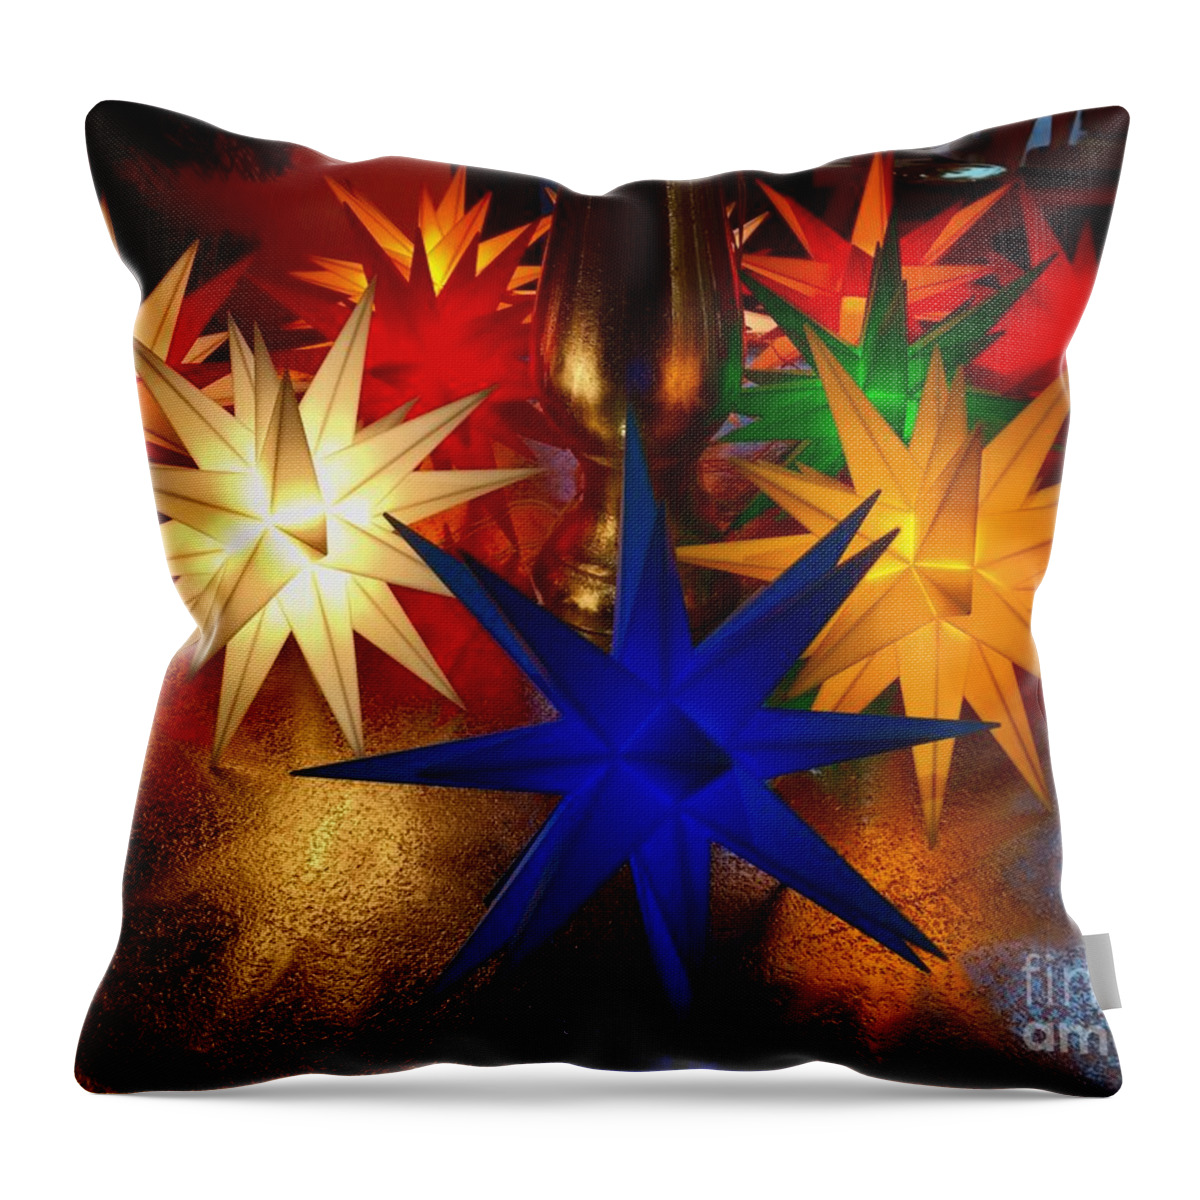 Stars Throw Pillow featuring the photograph Moravian Stars by Thomas Schroeder